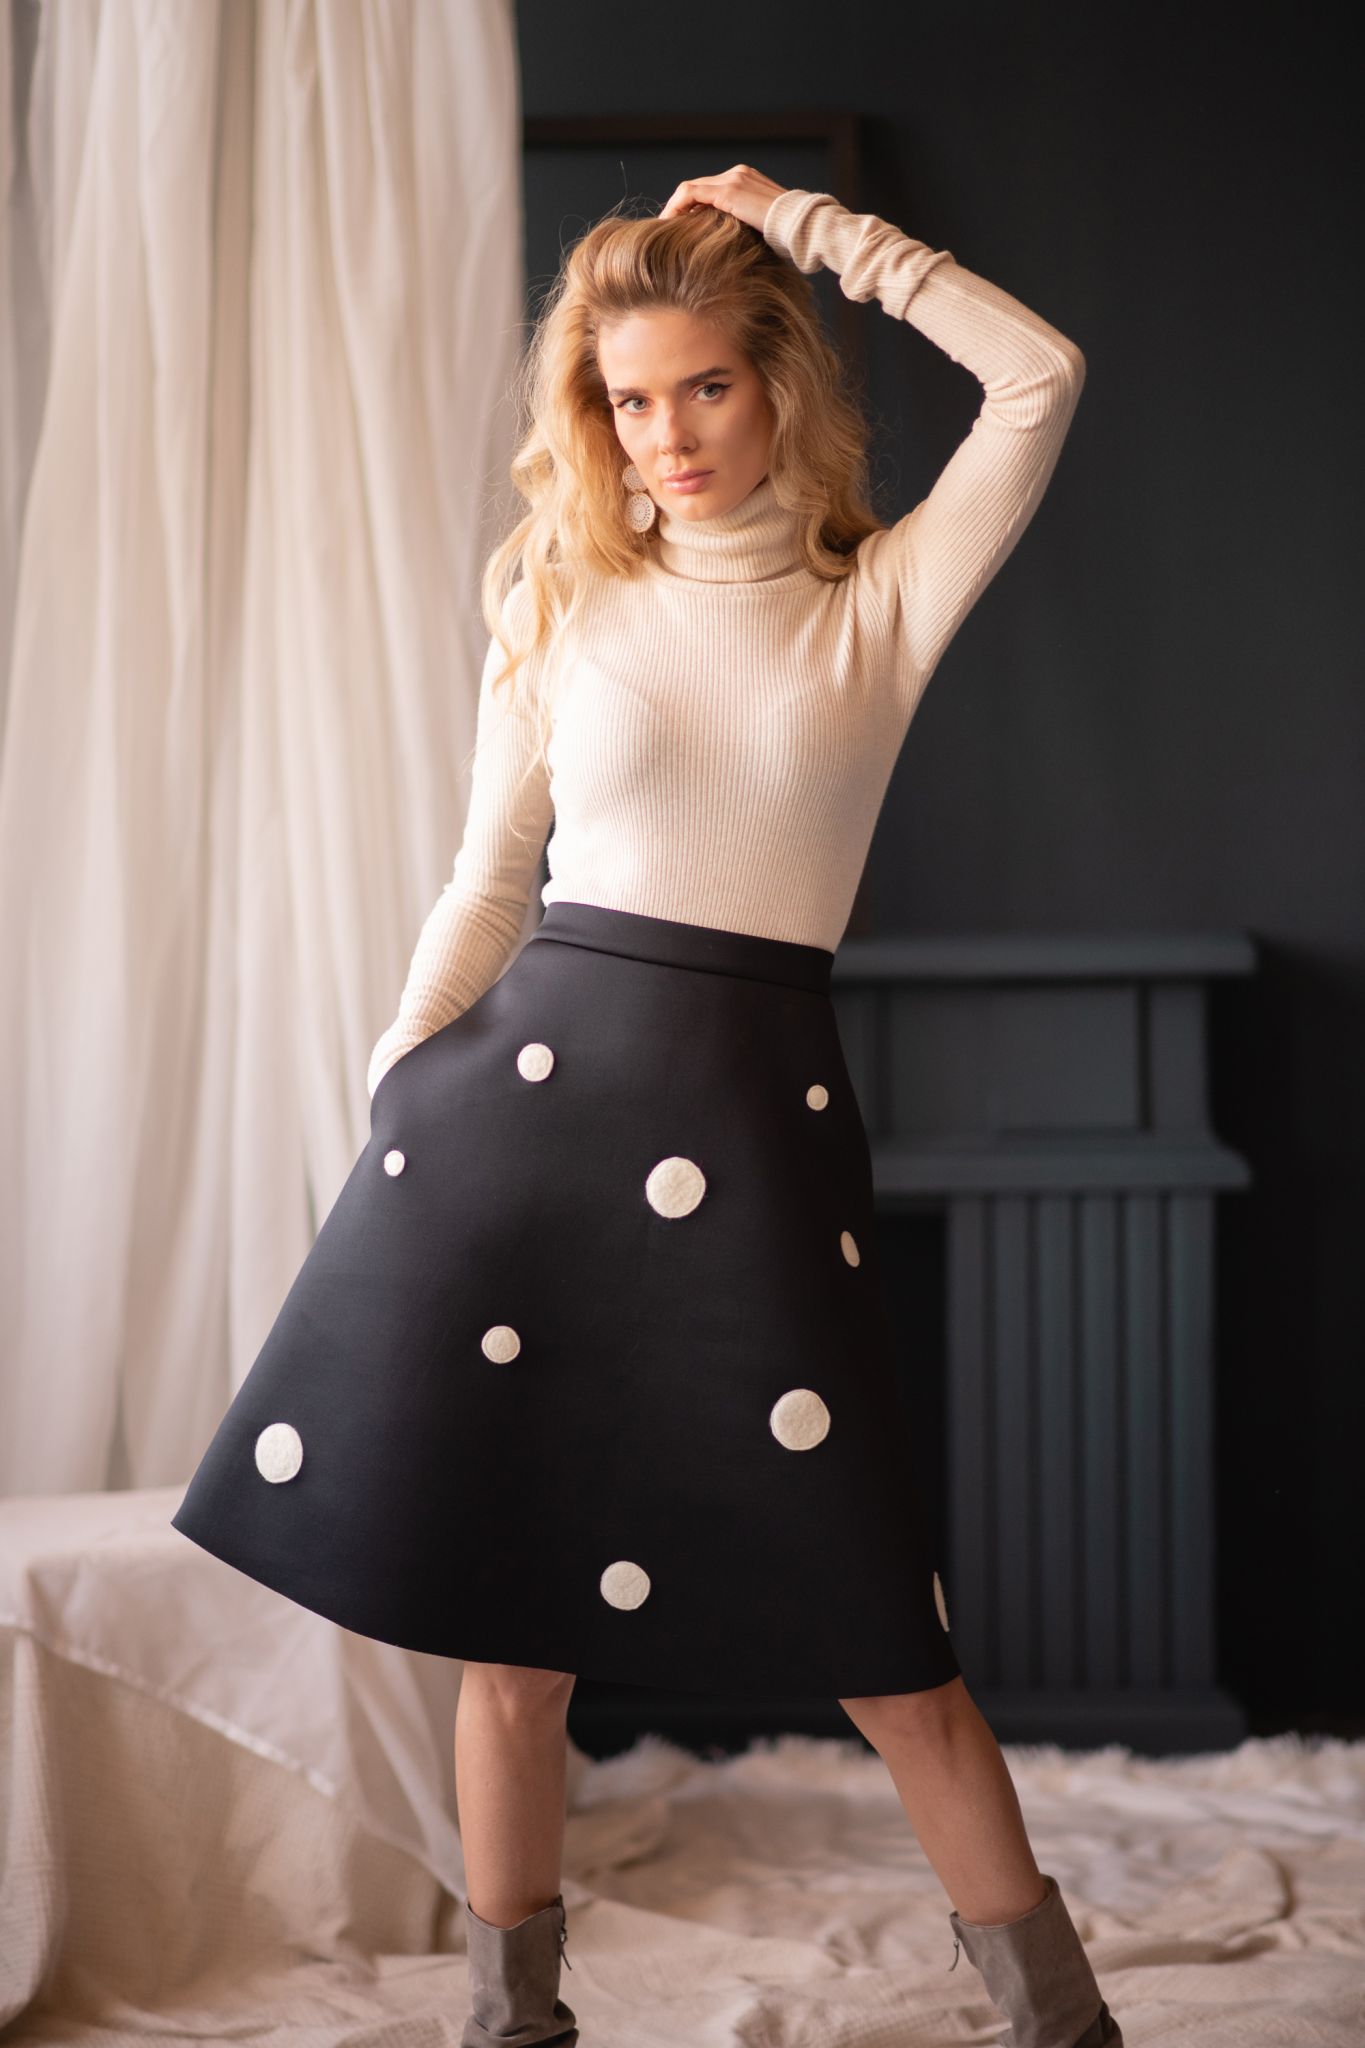 Arrange Pile of pressure Playing dots skirt - Happy Friday